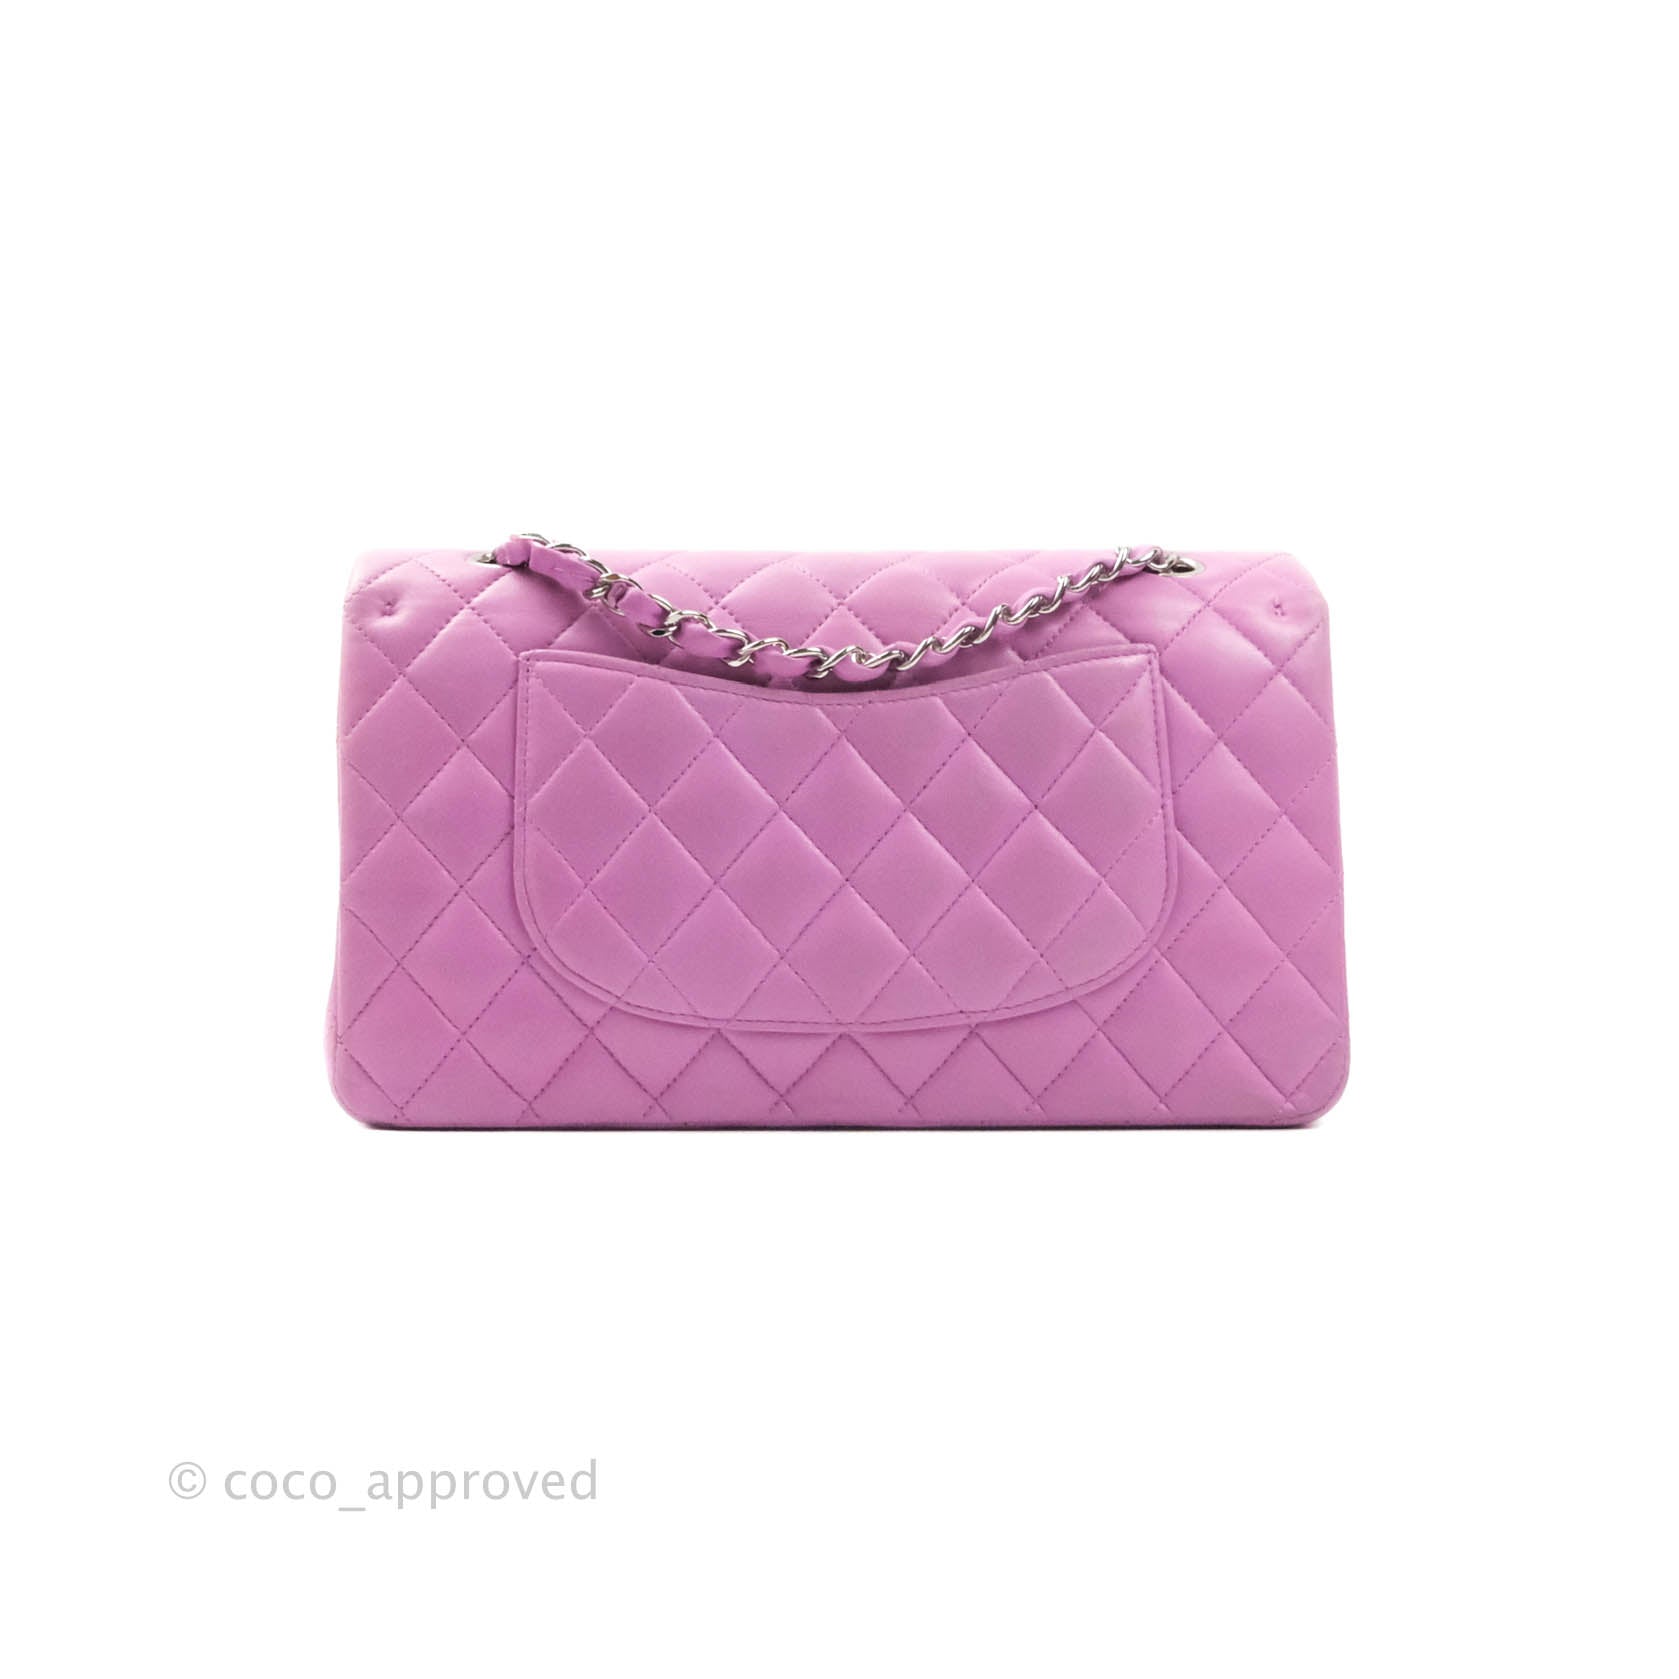 2011 Chanel Lilac Quilted Lambskin Medium Classic Double Flap Bag